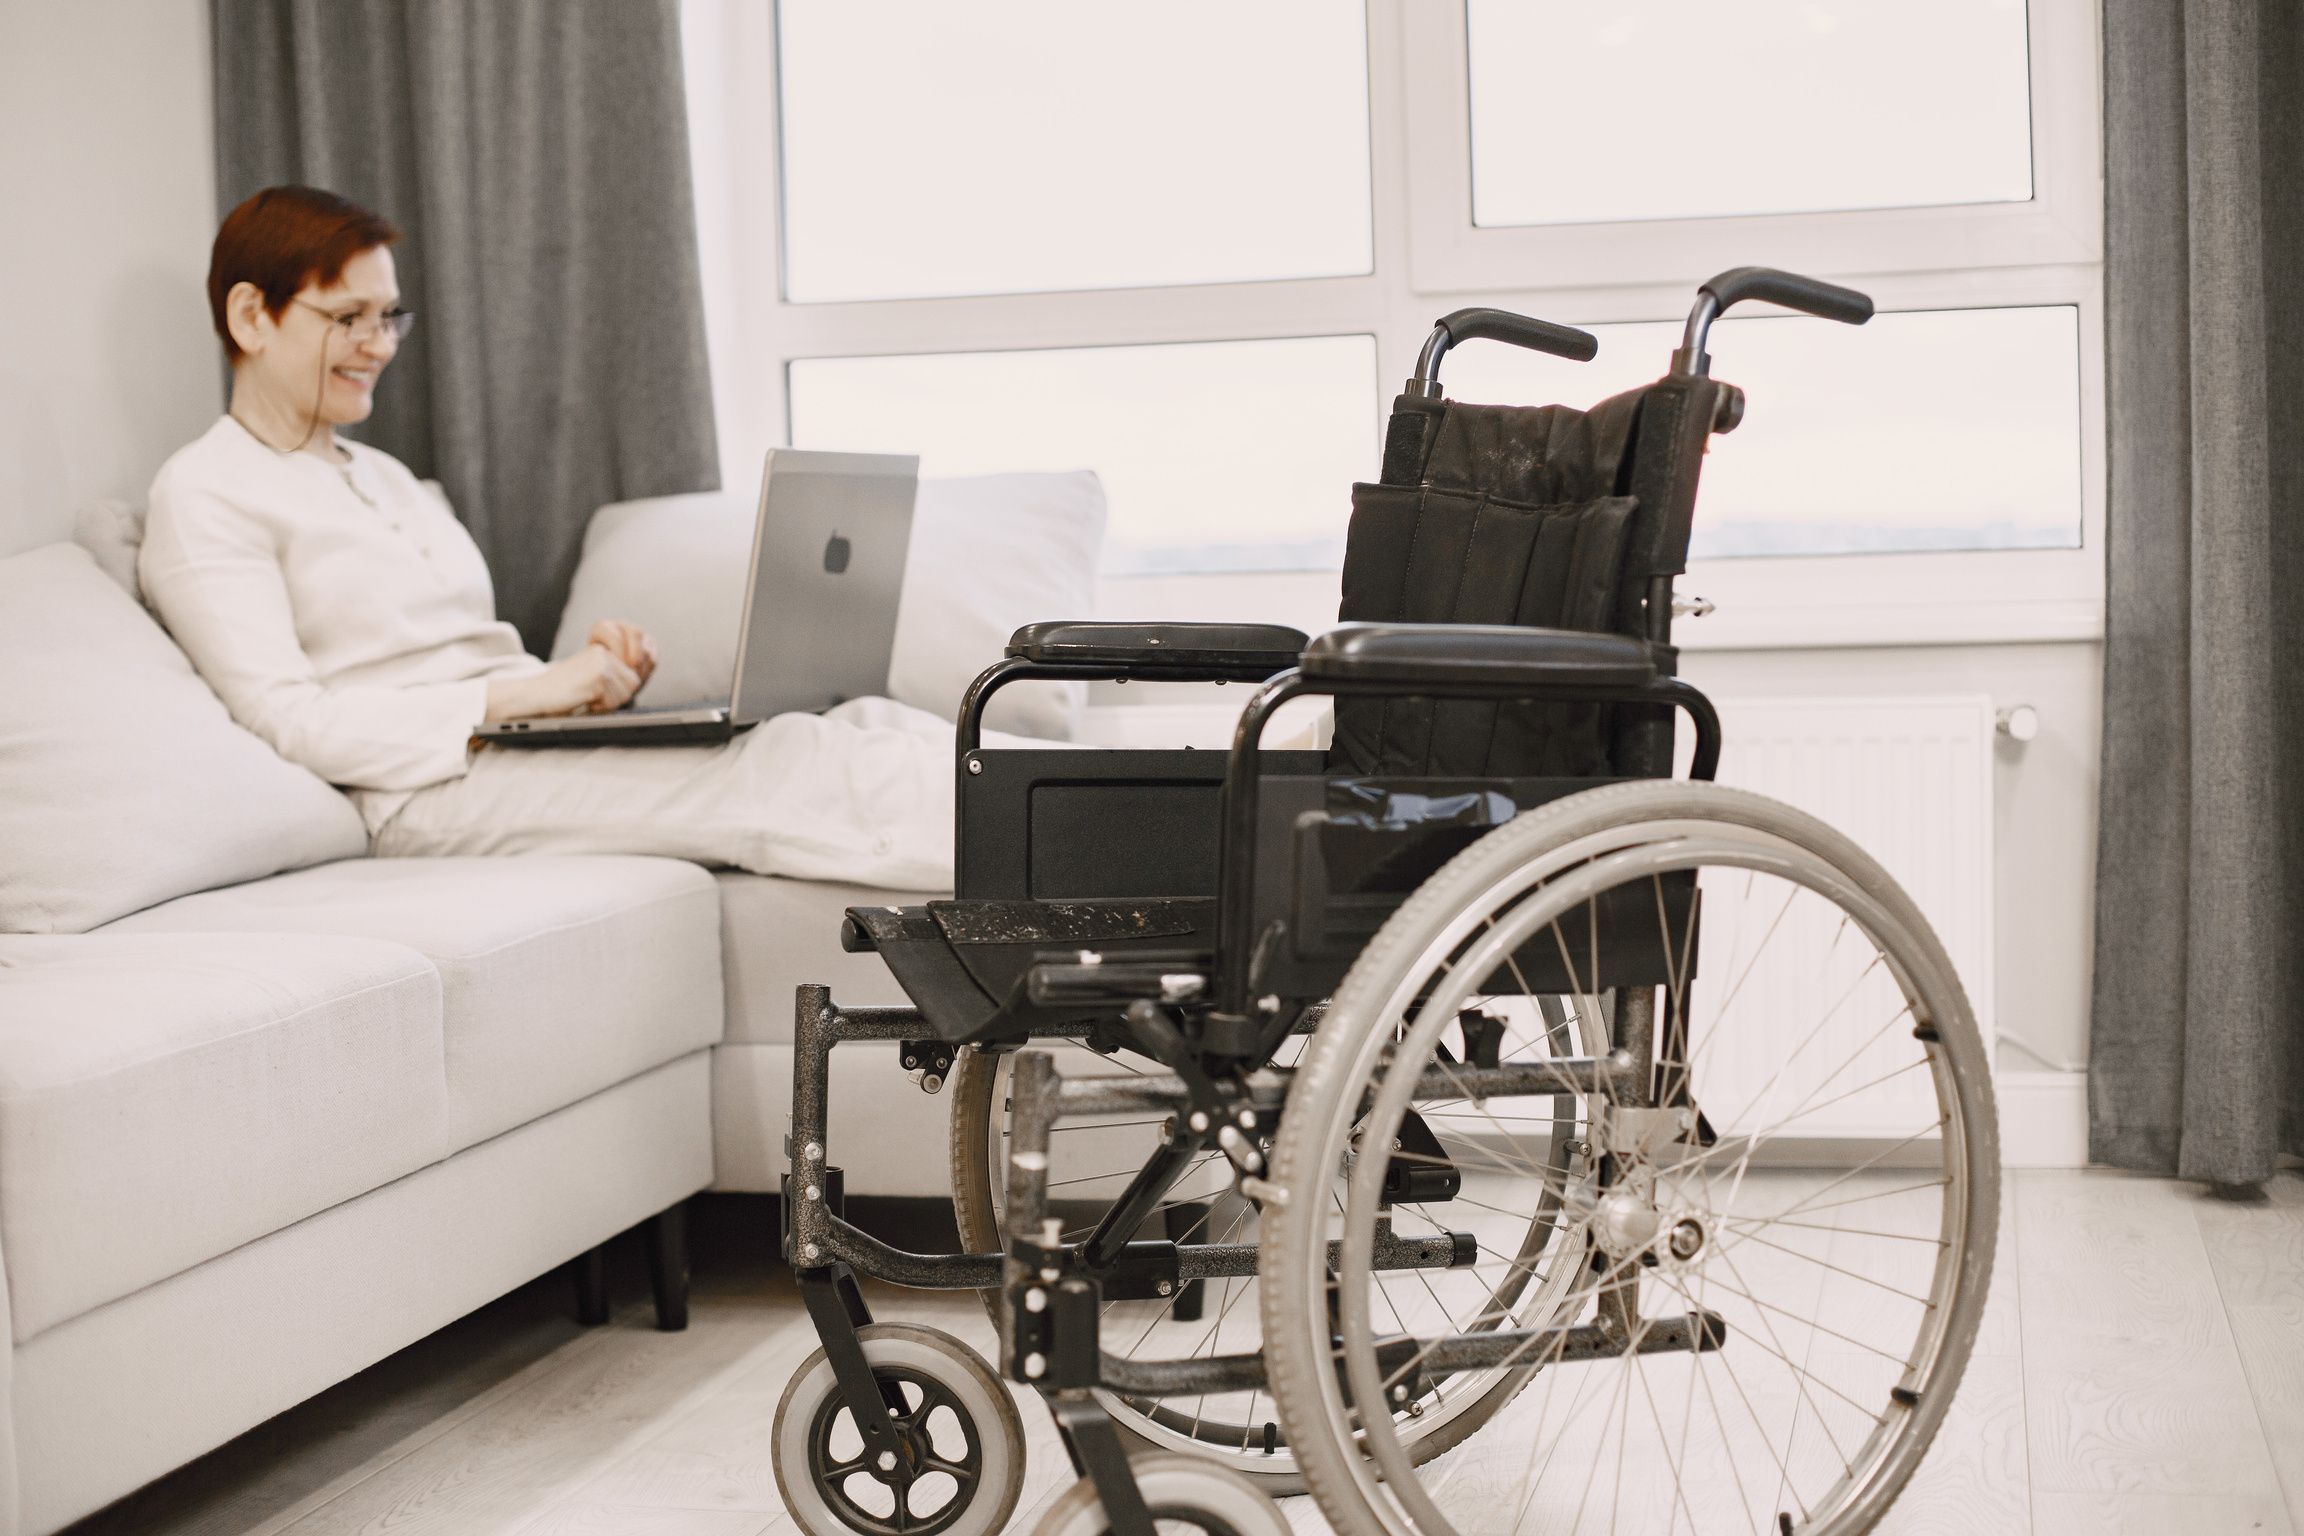 Smiling Woman Sitting on a Couch and Using Laptop and a Wheelchair Standing Next to the Couch 